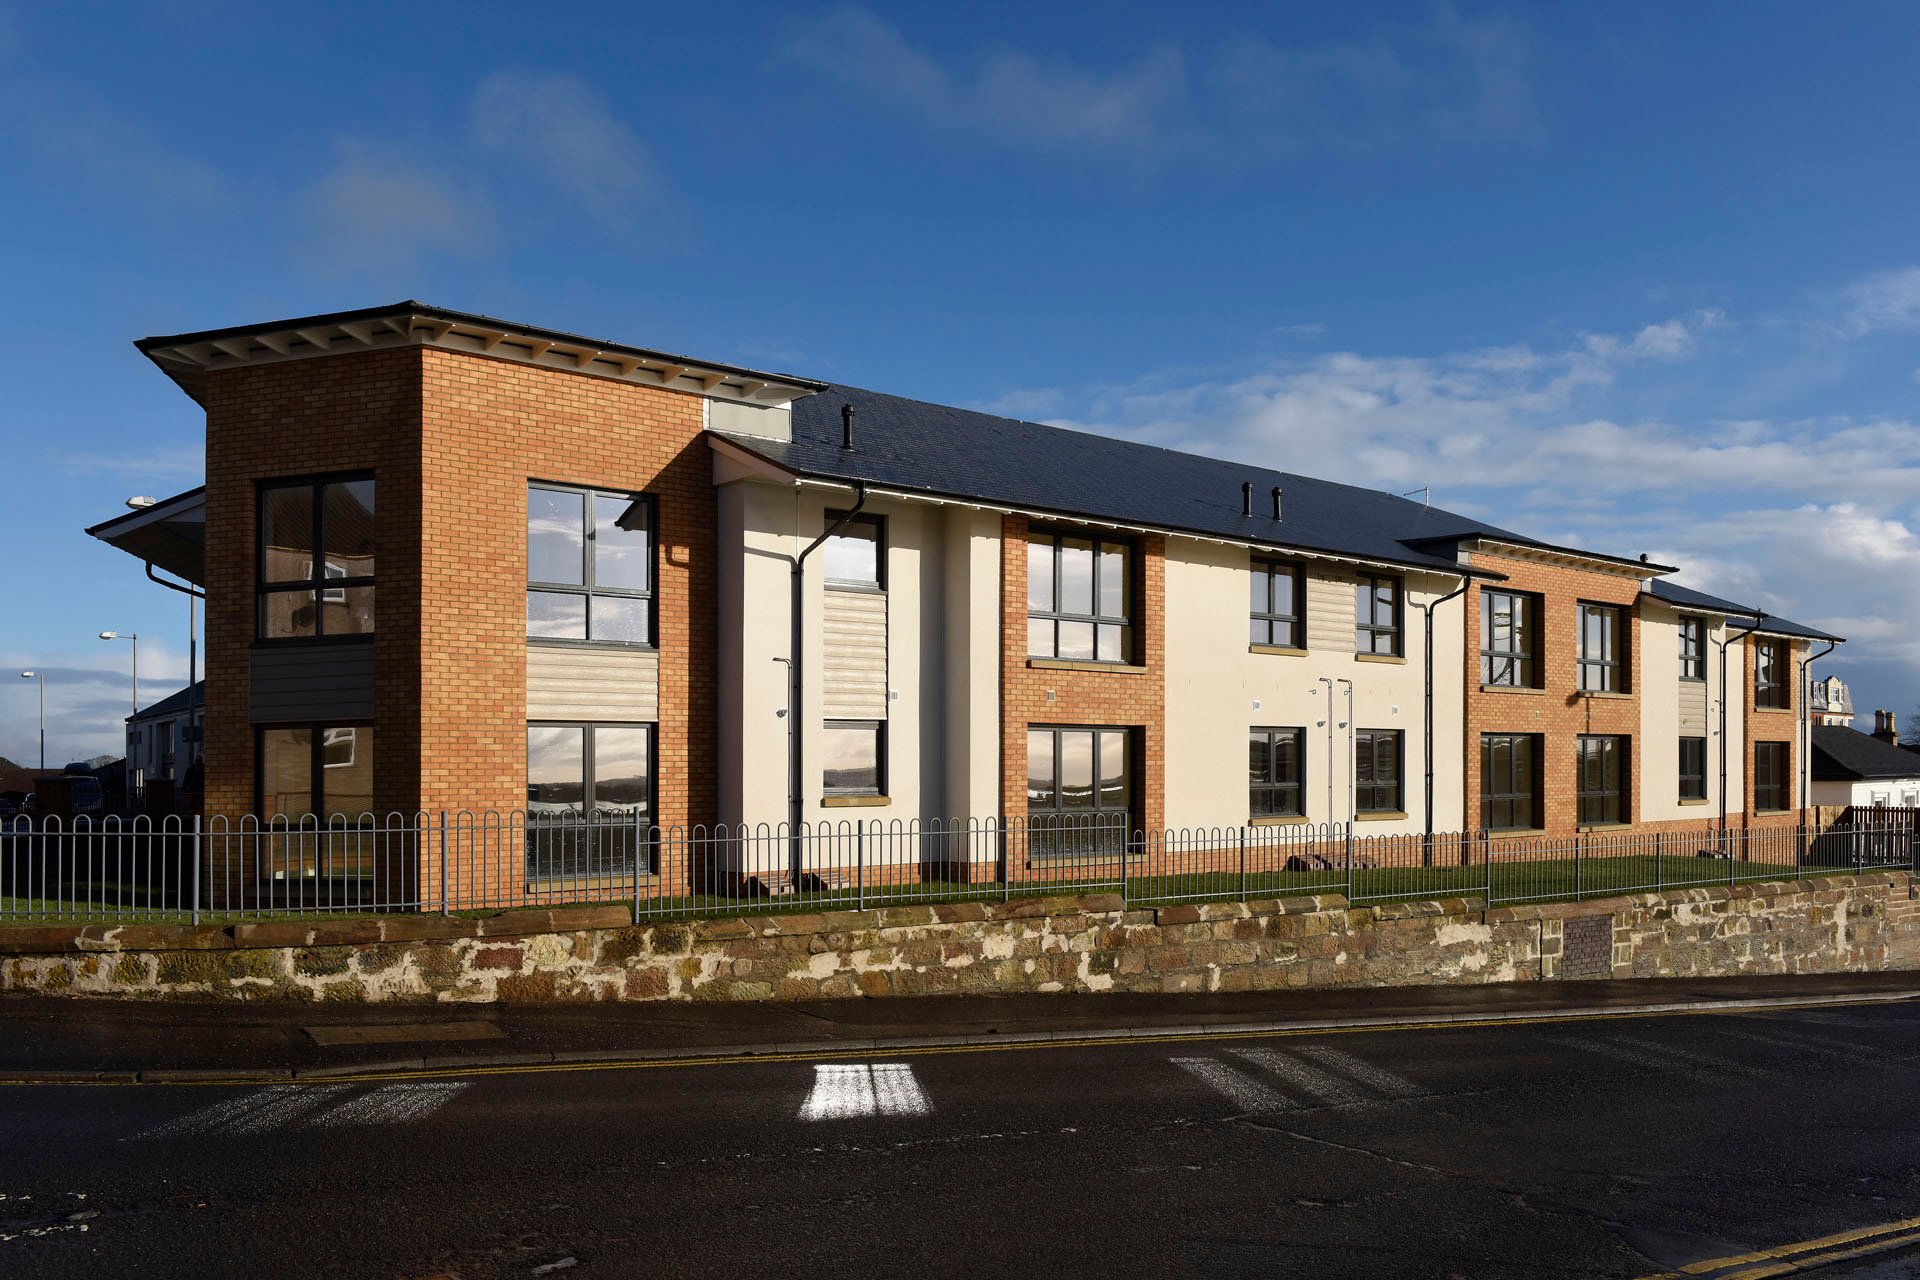 Older residents in Mauchline to benefit from housing investment